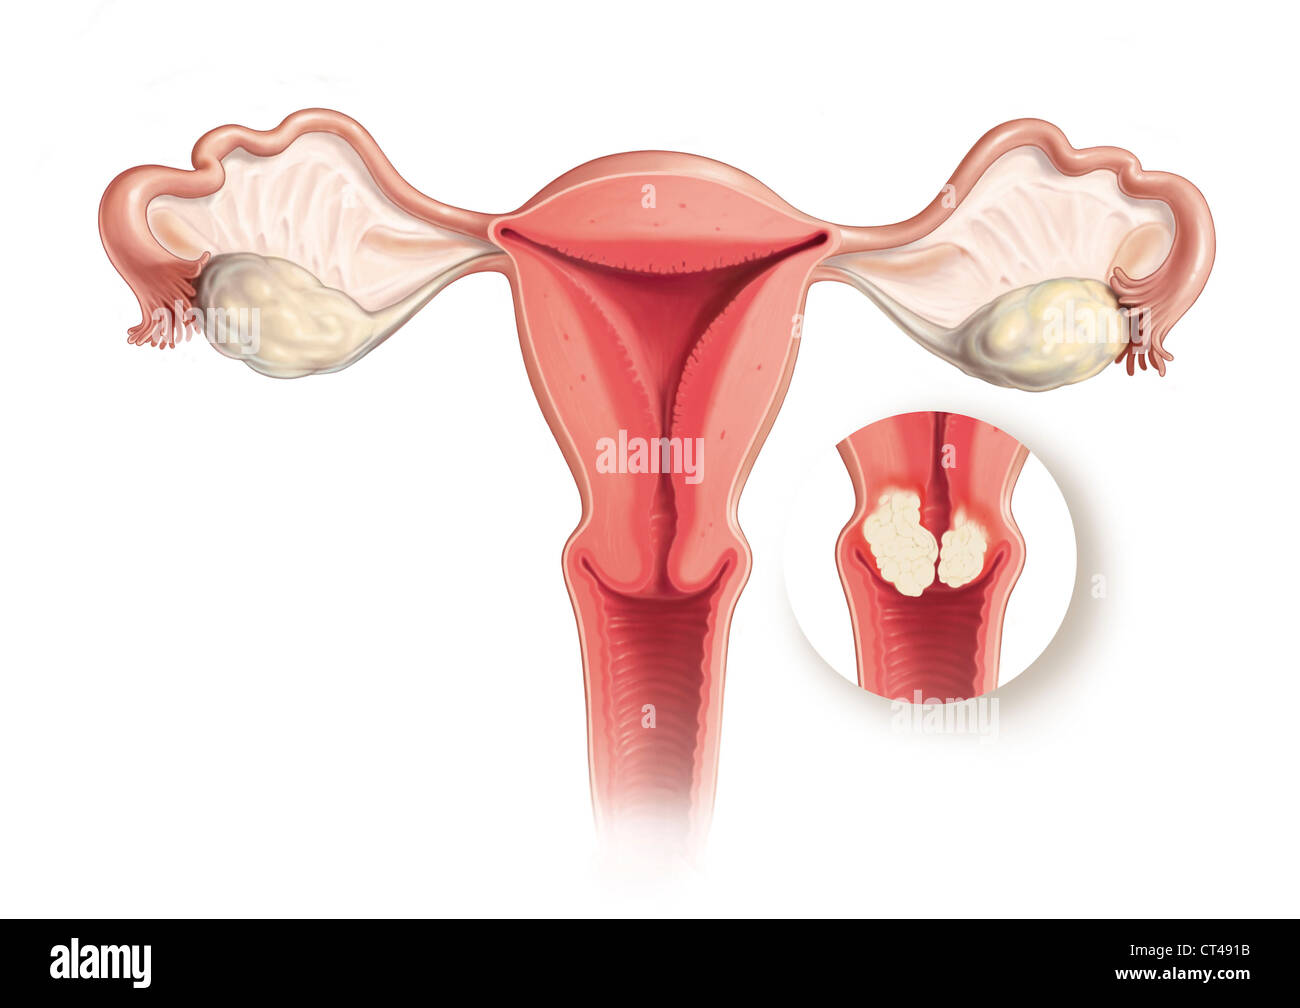 CANCER OF THE UTERUS, DRAWING Stock Photo - Alamy